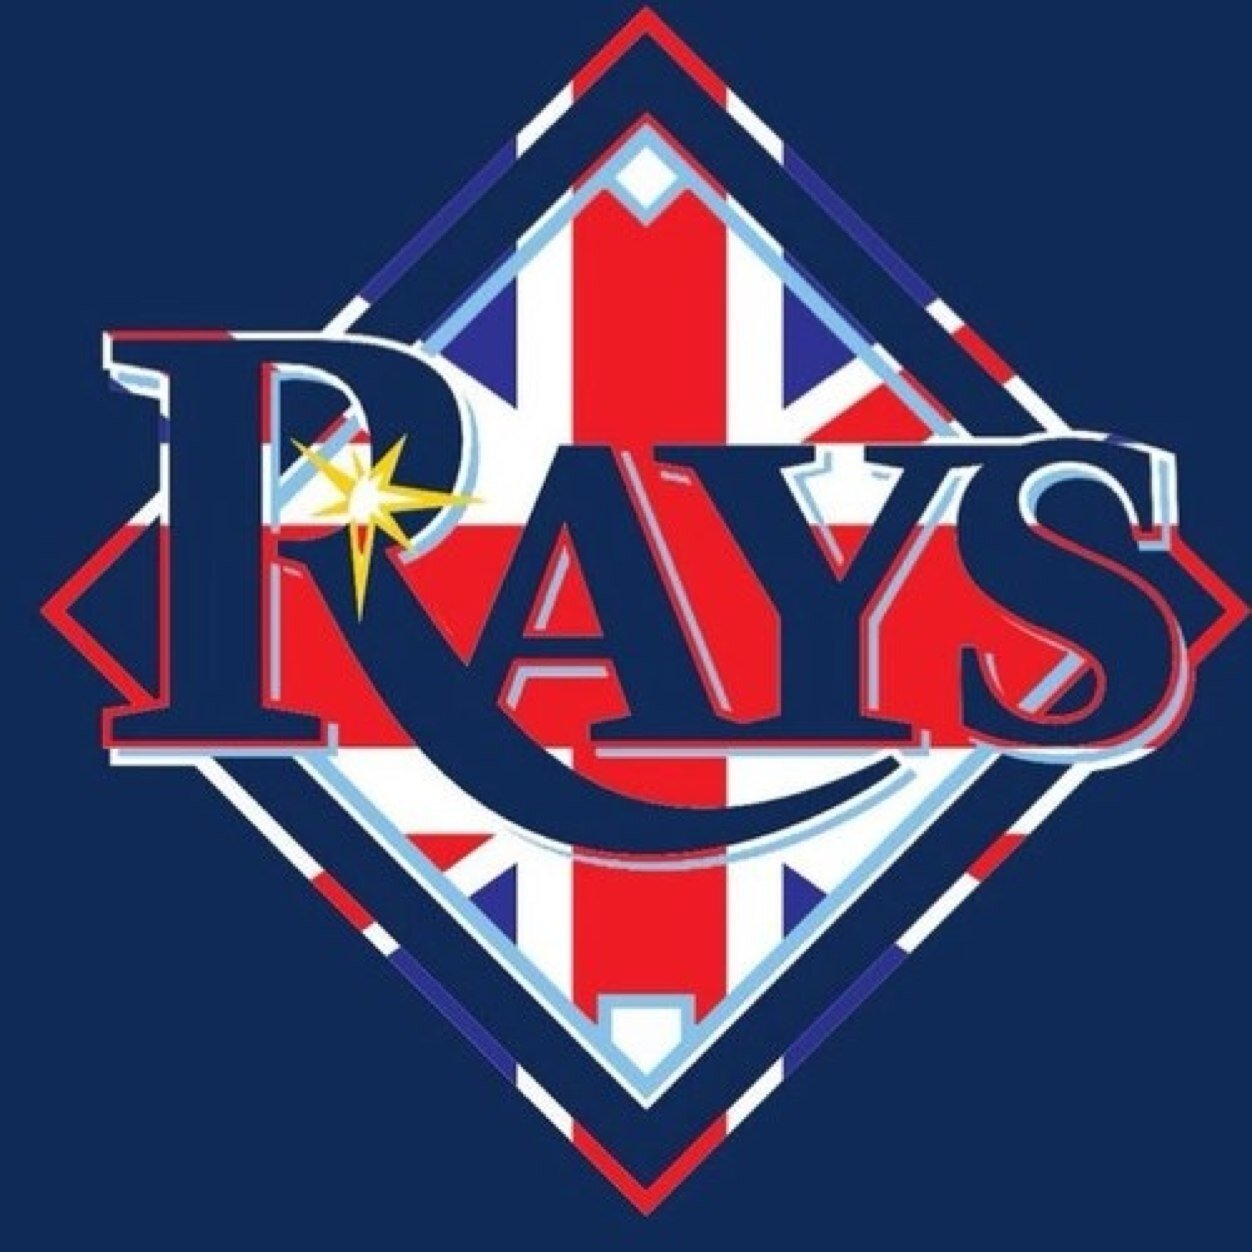 Home of the #UKRays - the UK fan base of the Tampa Bay Rays!